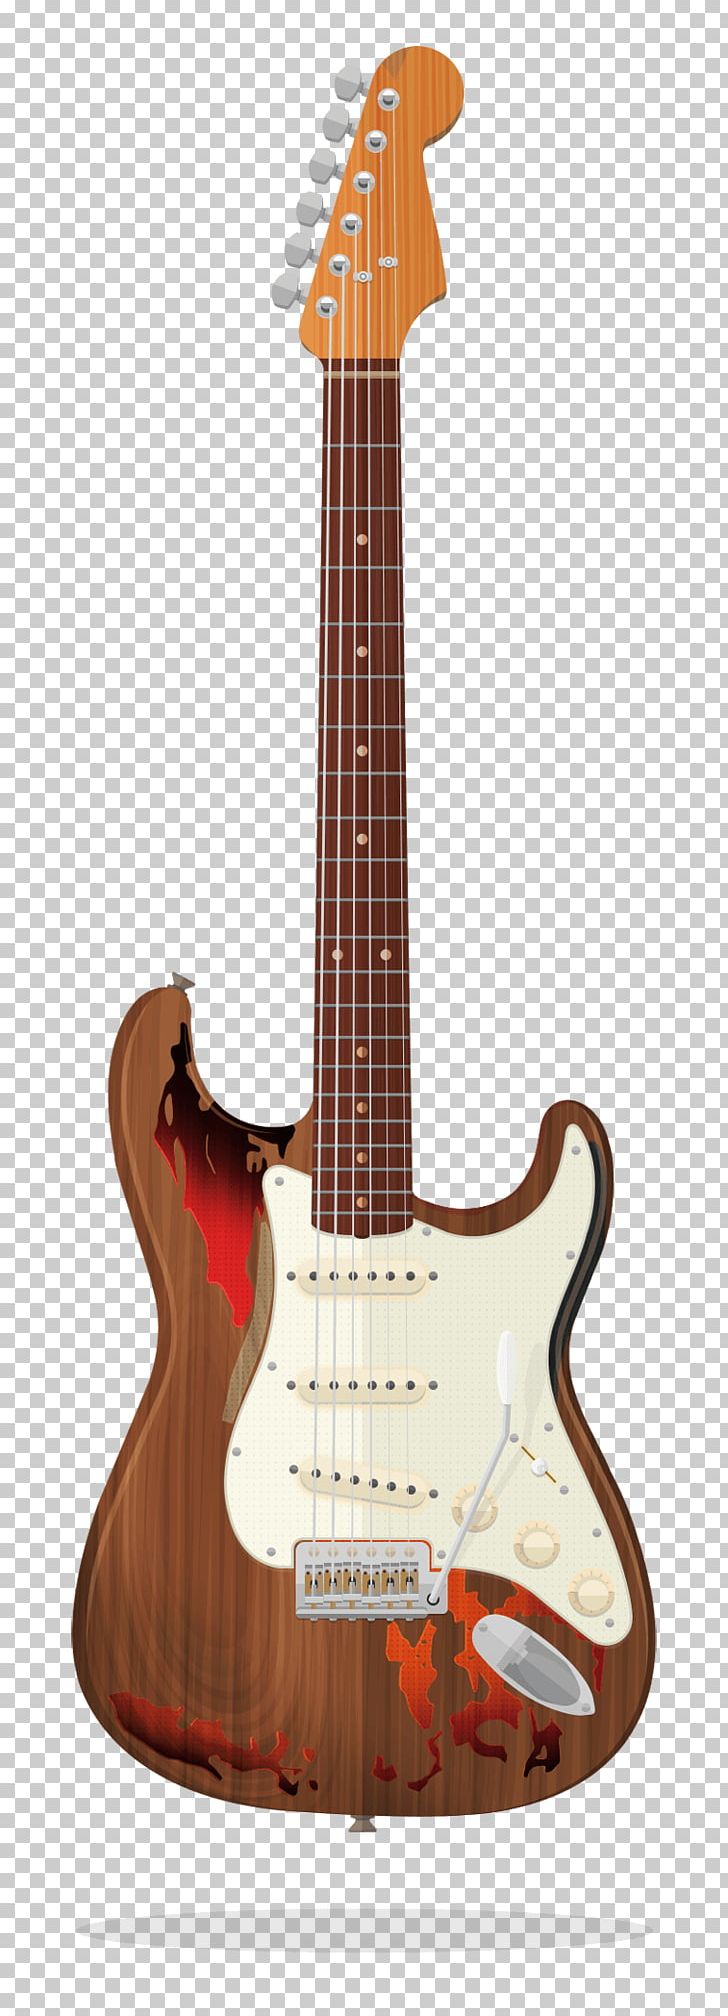 Electric Guitar Fender Stratocaster Bass Guitar Fender Telecaster Eric Clapton Stratocaster PNG, Clipart, Acoustic Electric Guitar, Acoustic Guitar, Against, Cuatro, Fender Telecaster Free PNG Download